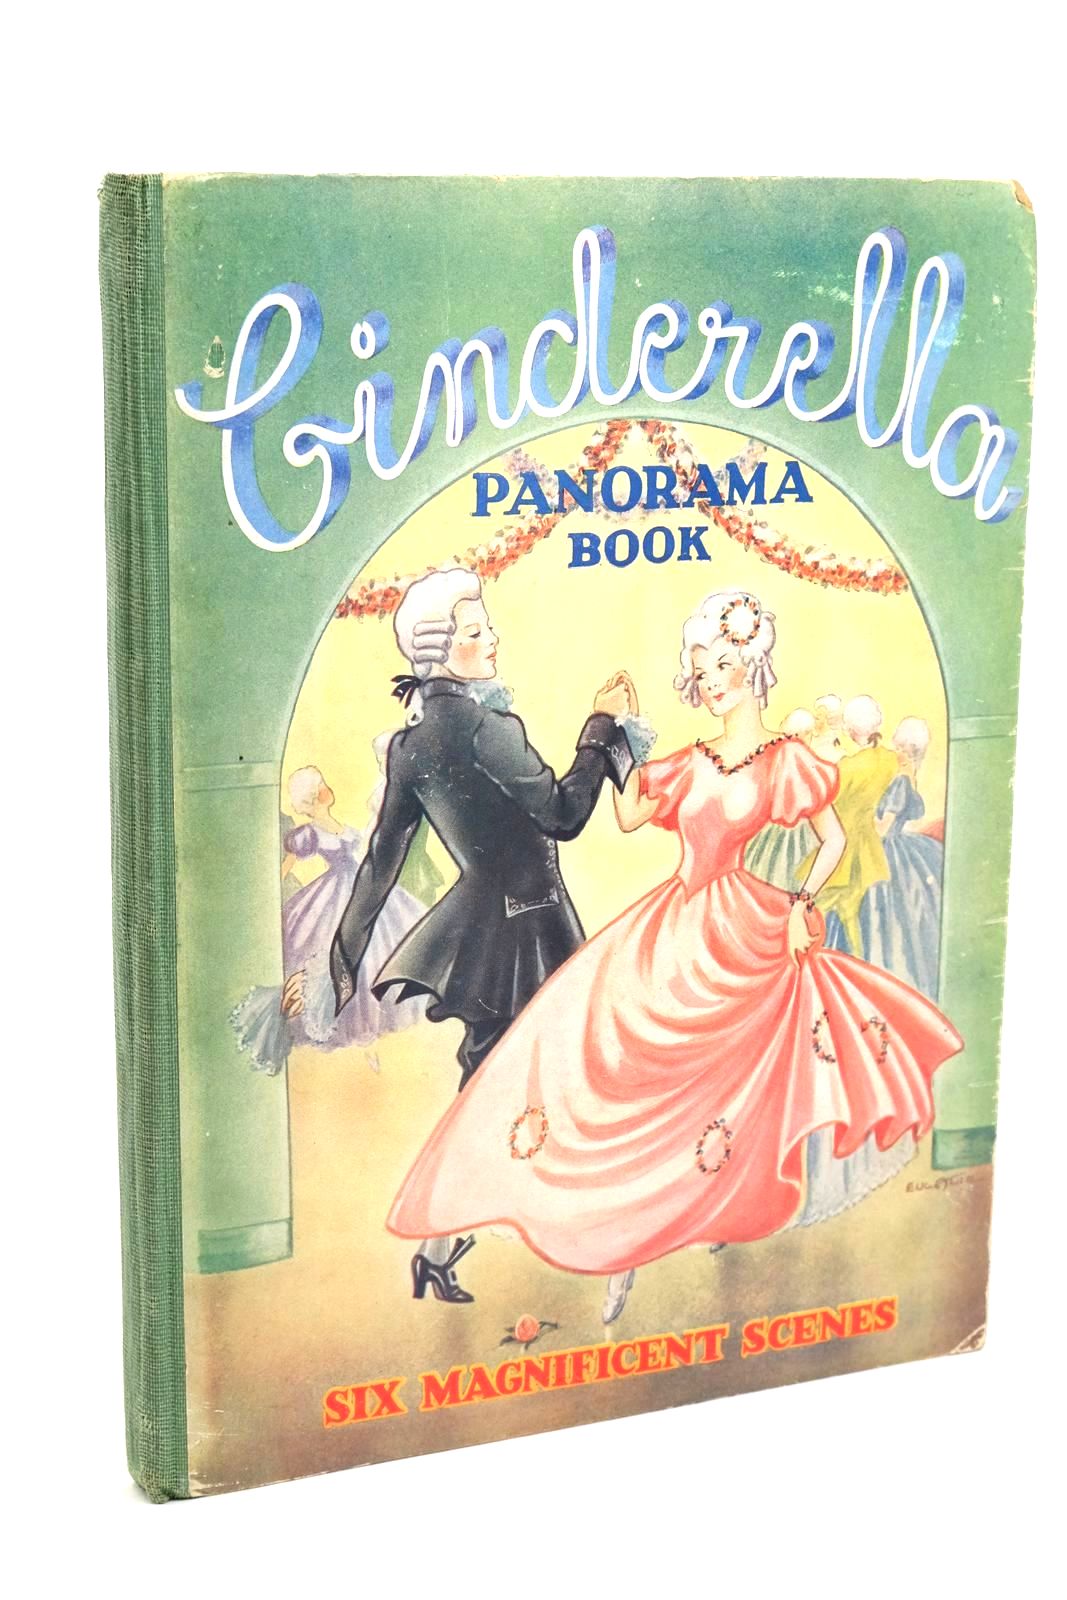 Photo of CINDERELLA PANORAMA BOOK published by Collins (STOCK CODE: 1322242)  for sale by Stella & Rose's Books